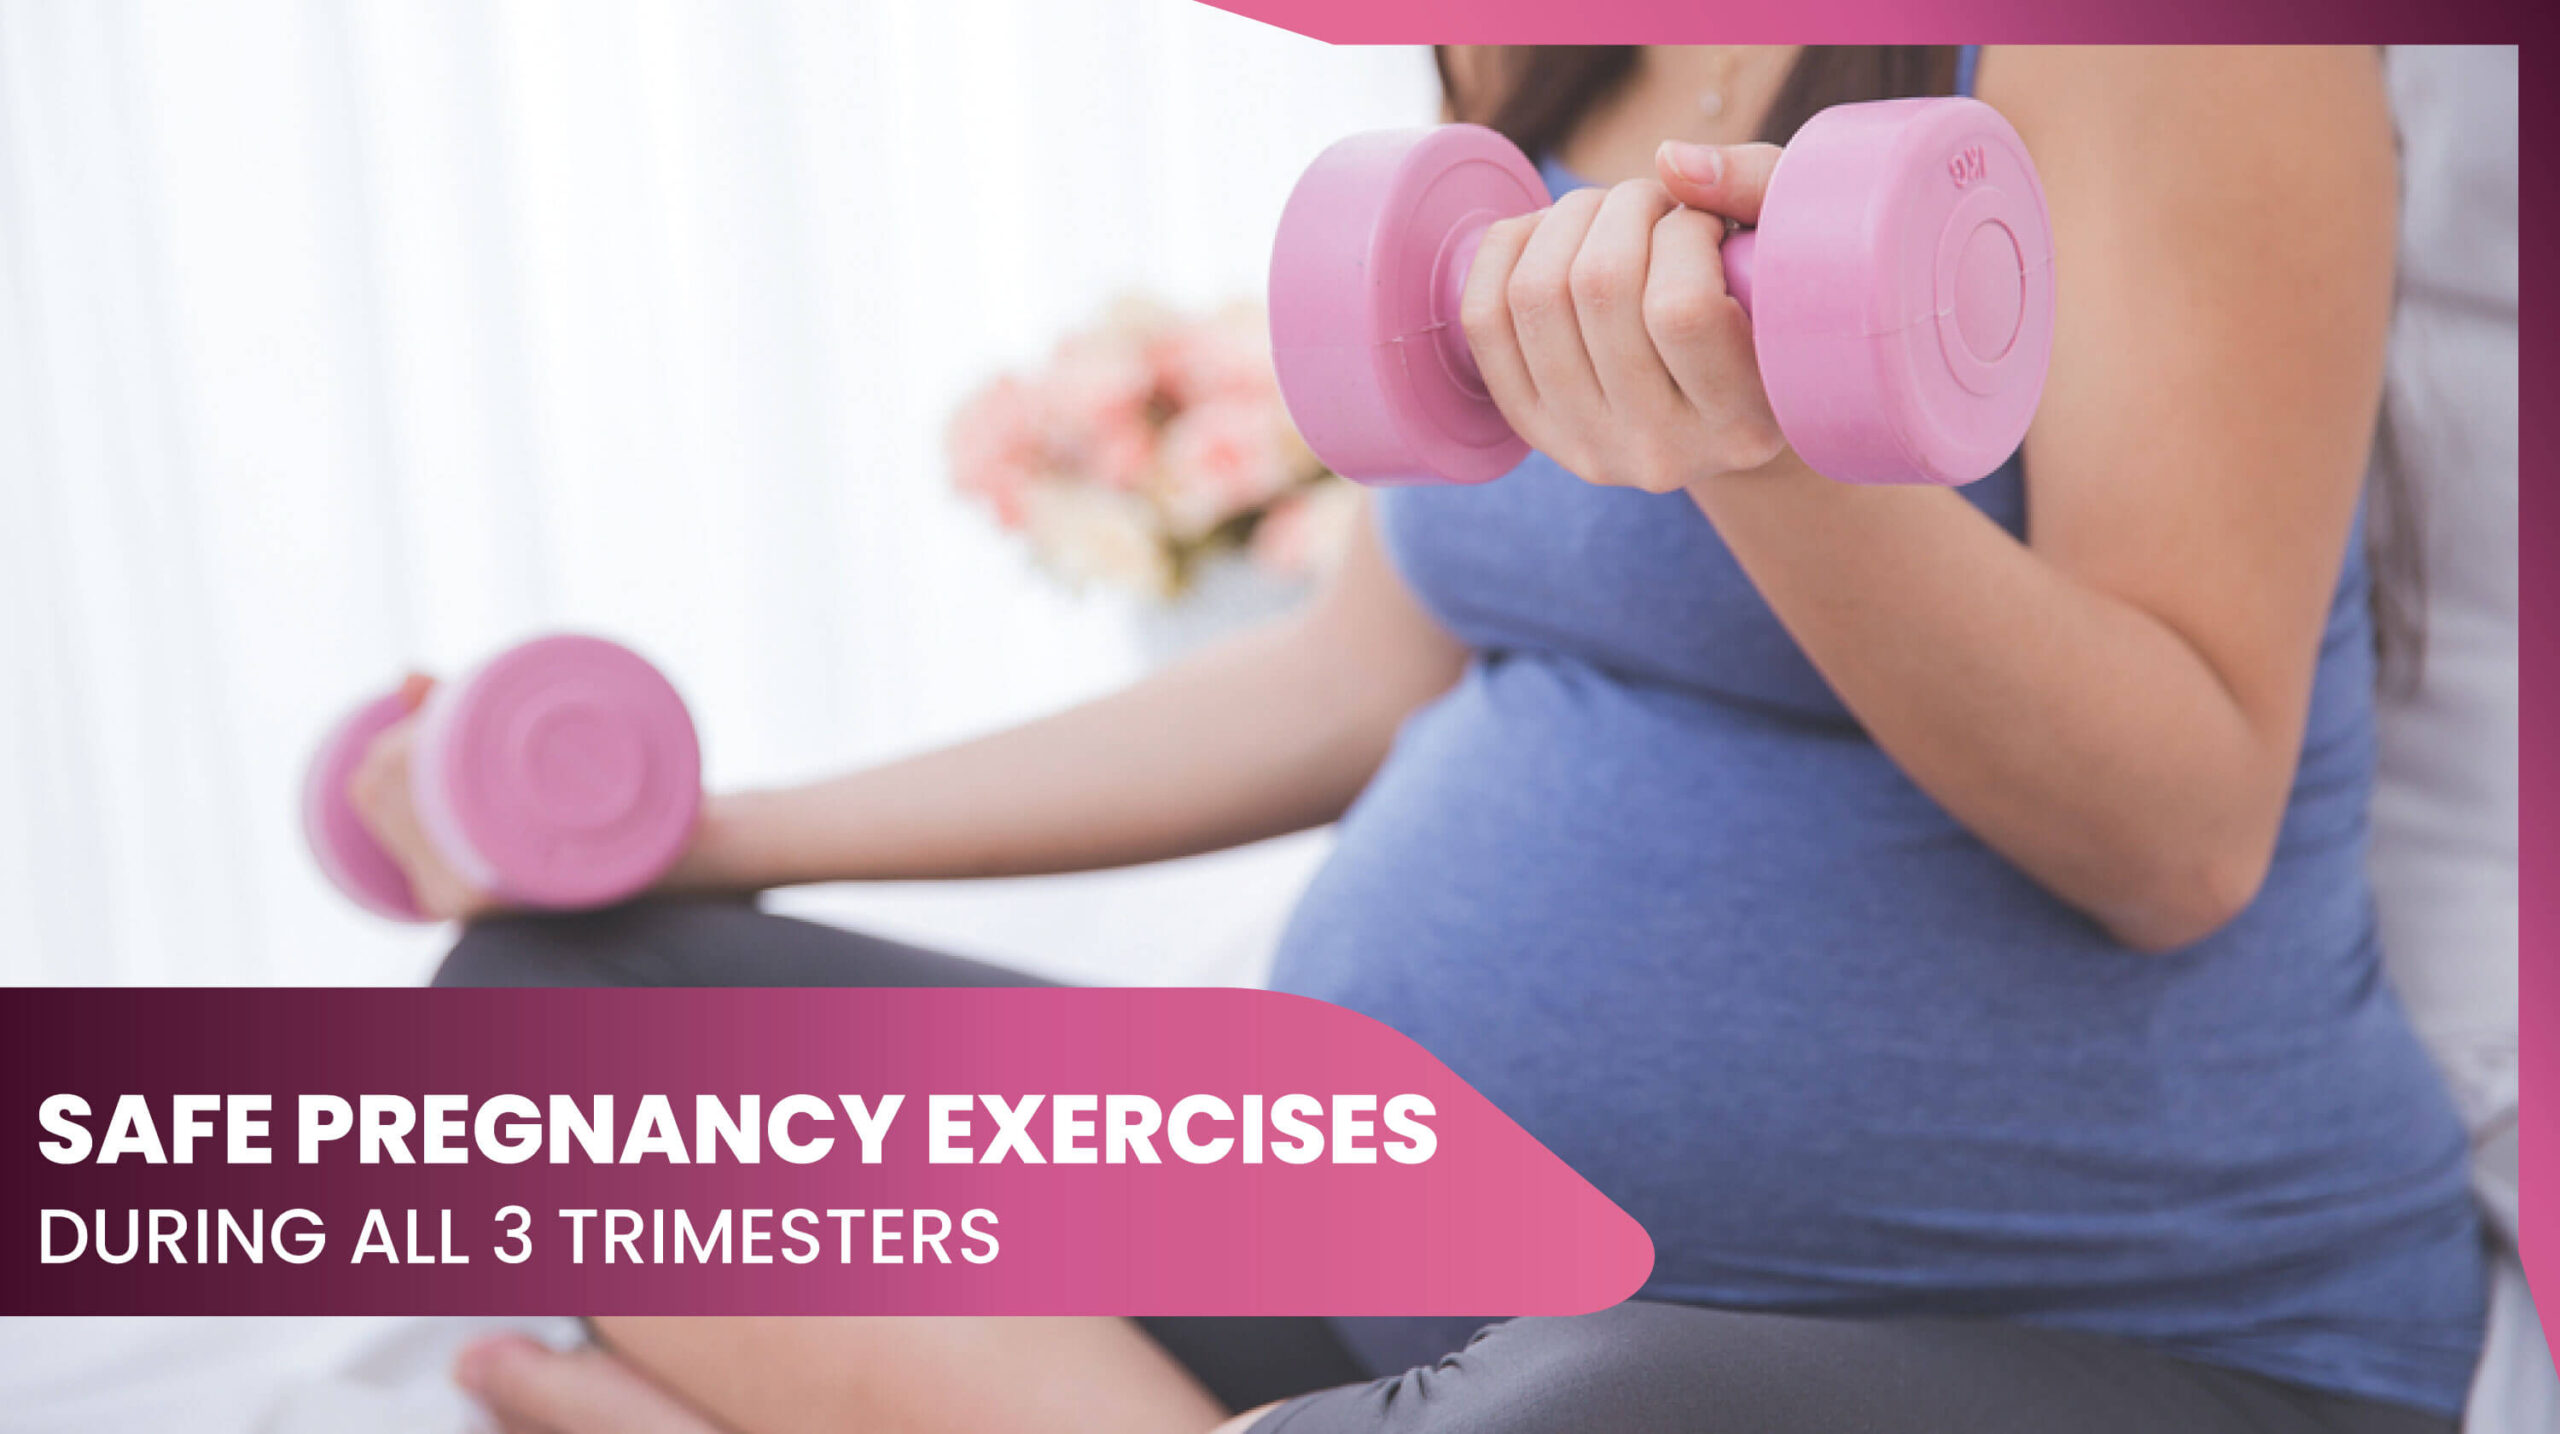 11Safe Pregnancy Exercises During All 3 Trimesters Guide